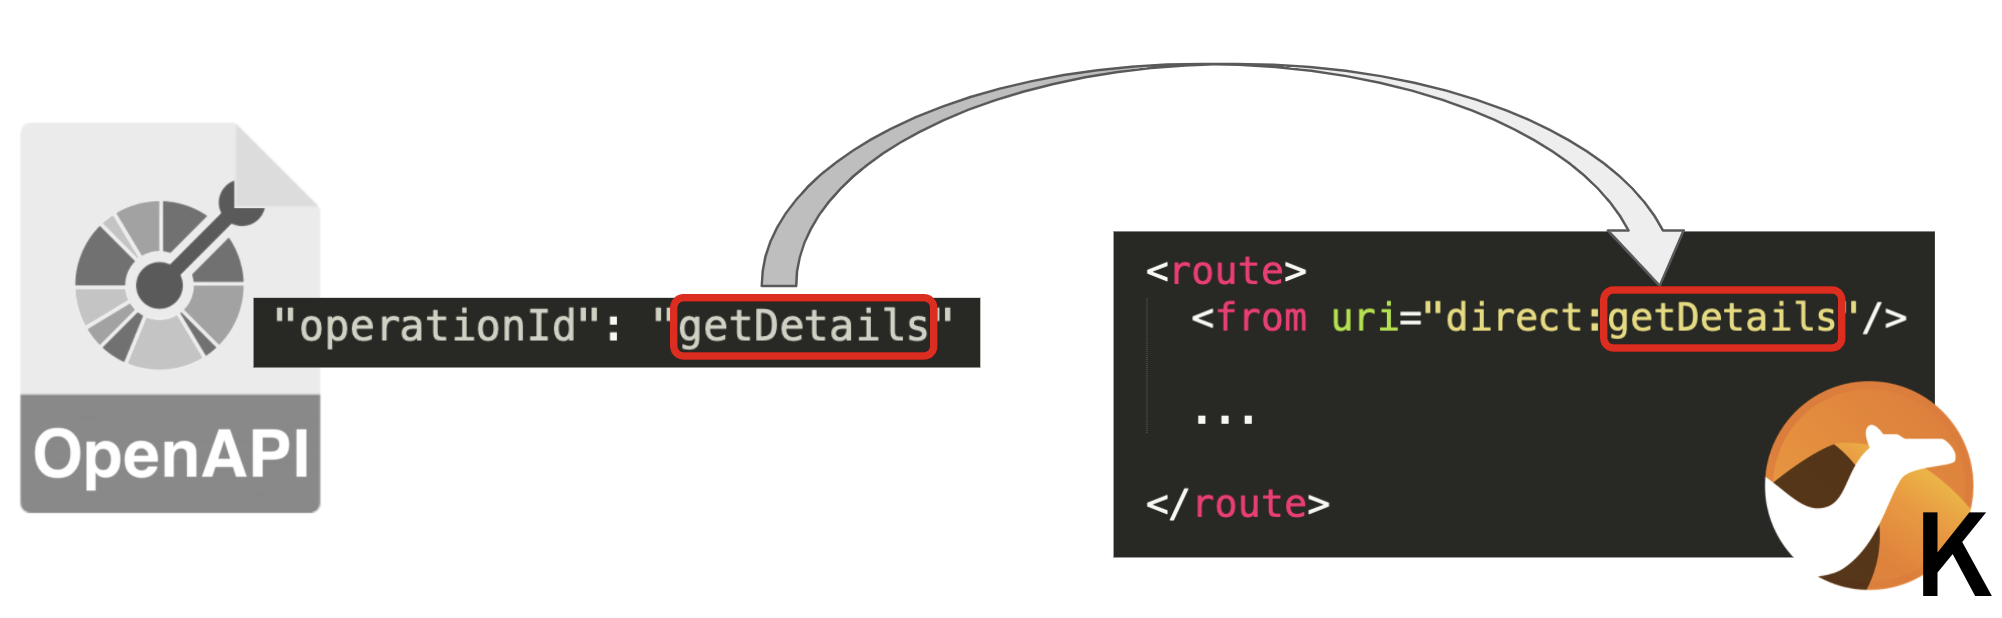 The operationId in the OpenAPI definition matches the route in Camel K.